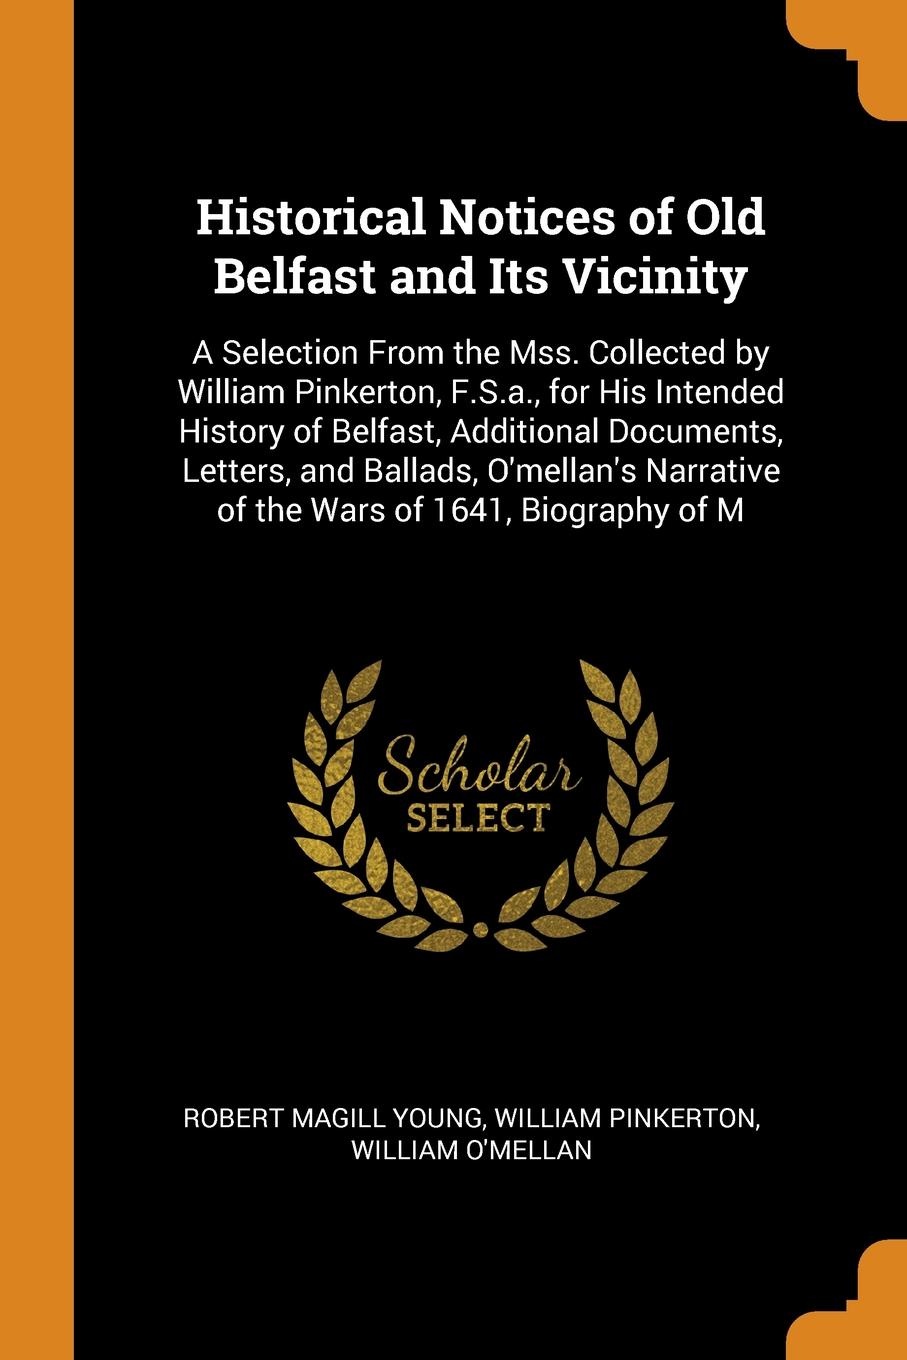 Historical Notices of Old Belfast and Its Vicinity. A Selection From the Mss. Collected by William Pinkerton, F.S.a., for His Intended History of Belfast, Additional Documents, Letters, and Ballads, O`mellan`s Narrative of the Wars of 1641, Biogra...